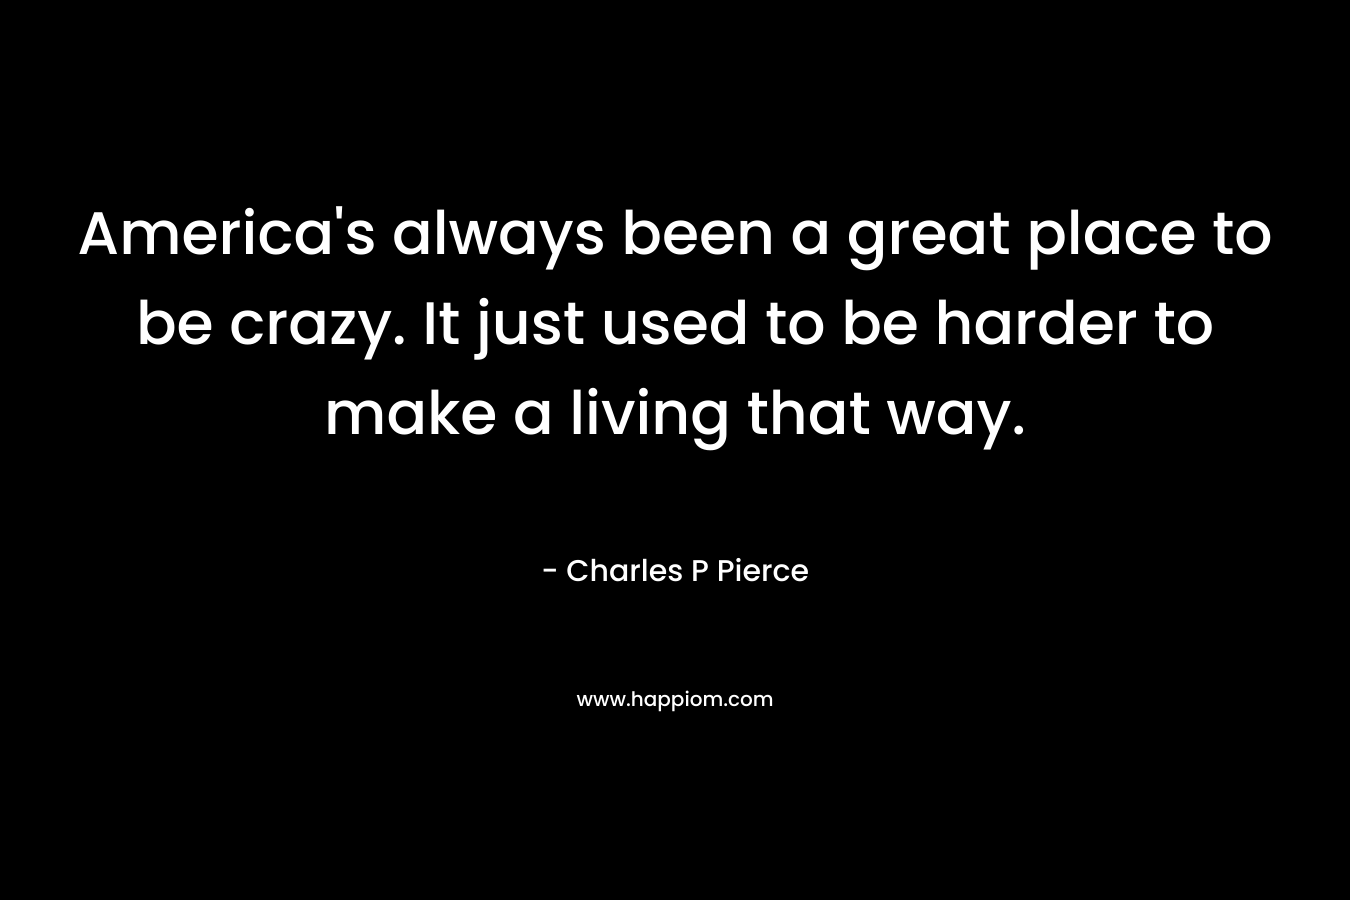 America’s always been a great place to be crazy. It just used to be harder to make a living that way. – Charles P Pierce